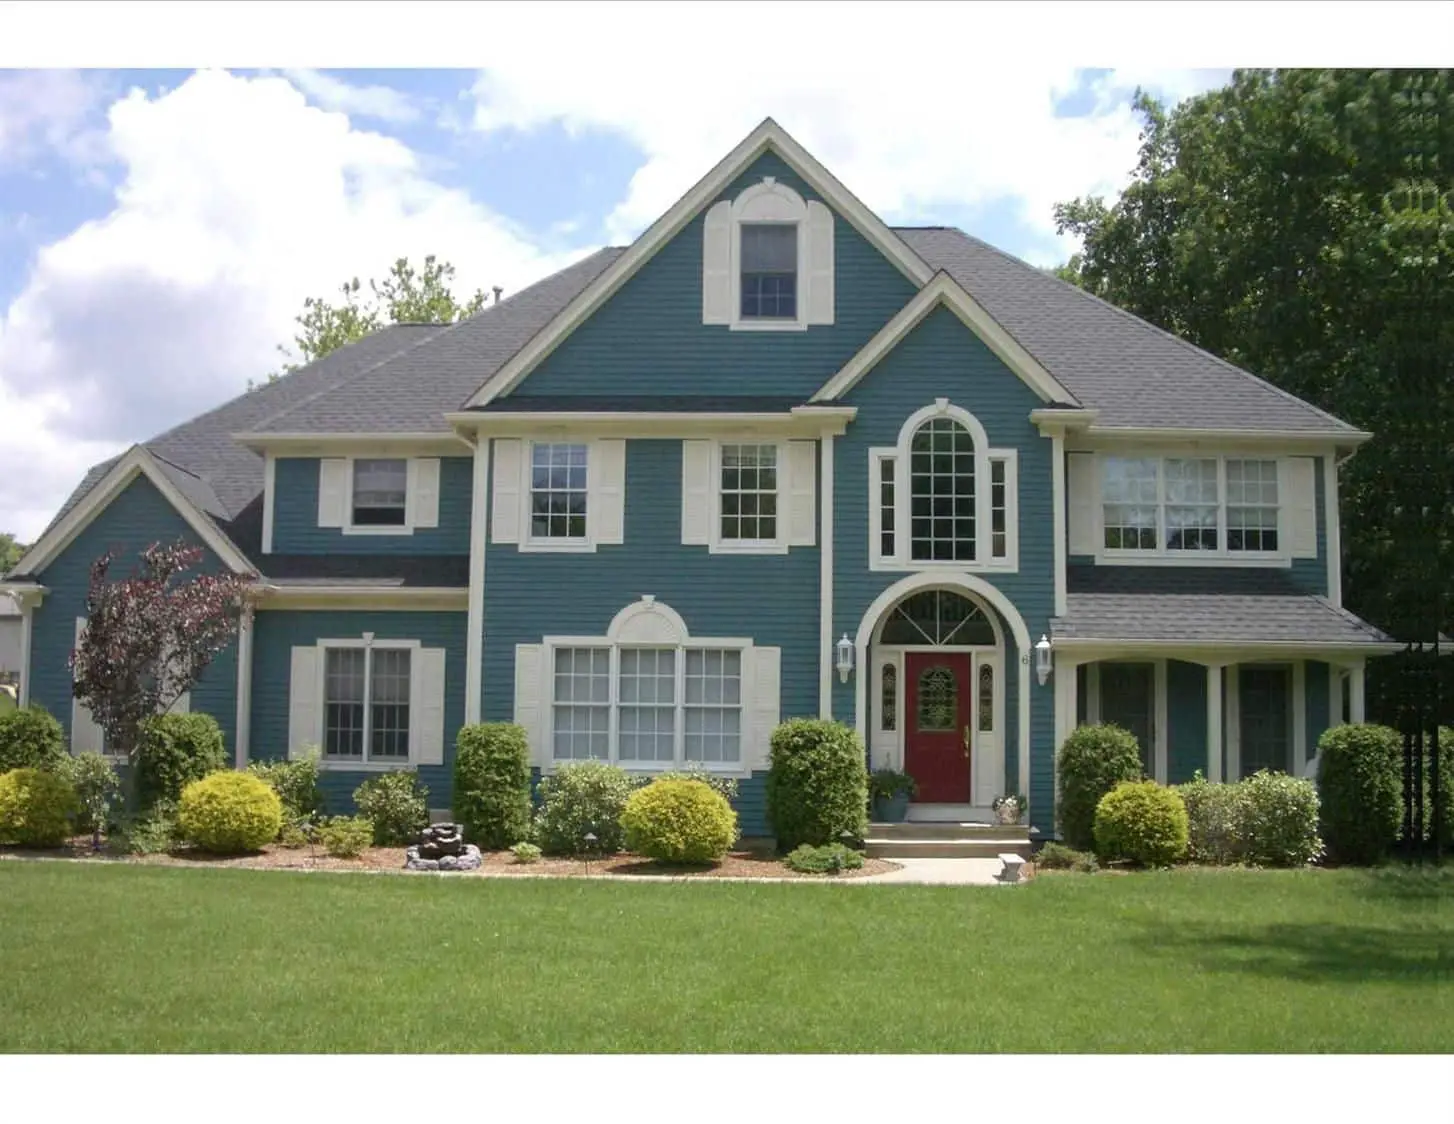 What Is A Good LVR For Exterior Paint